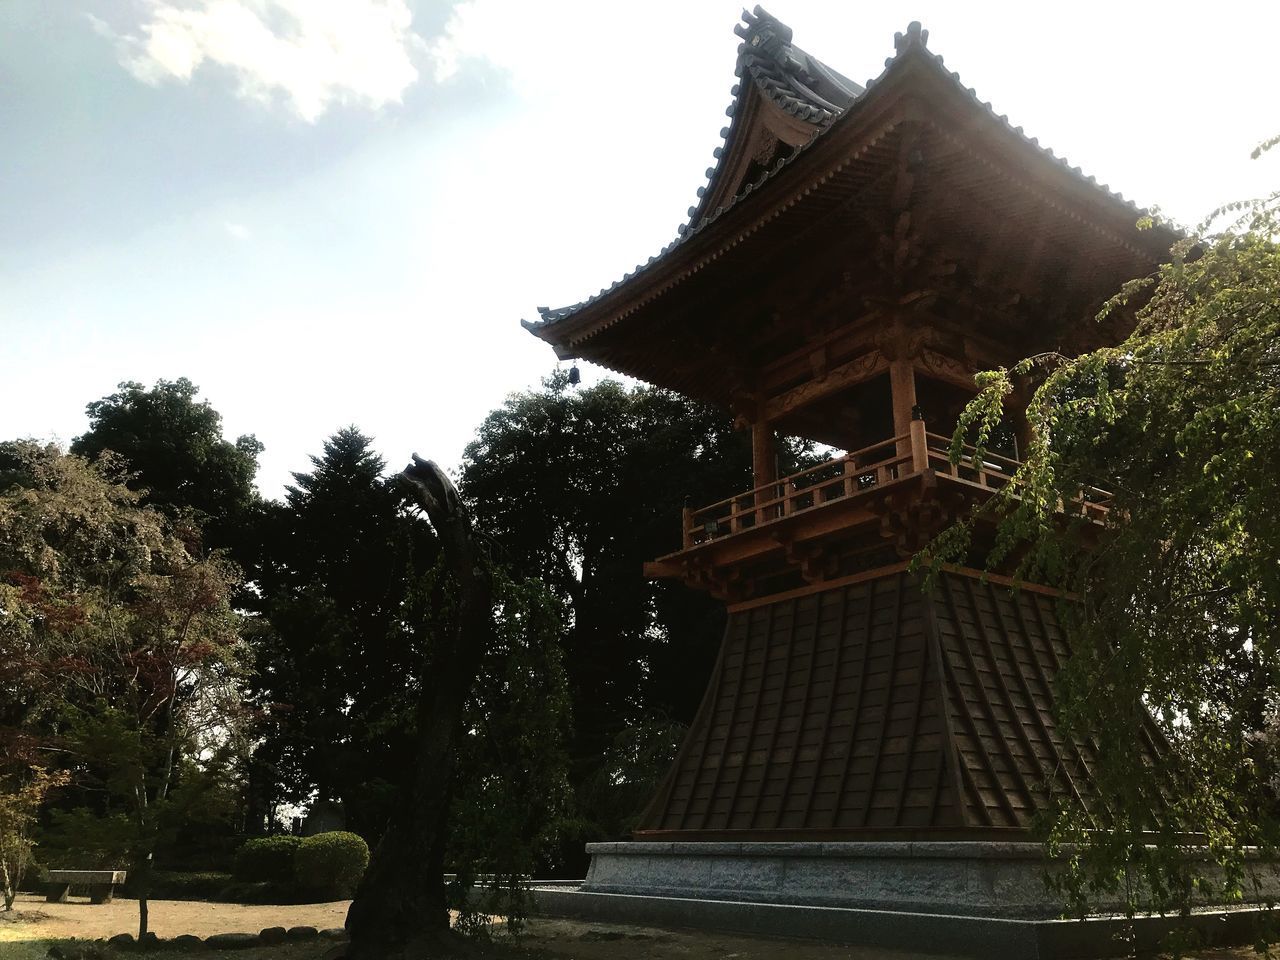 LOW ANGLE VIEW OF TEMPLE AGAINST BUILDING